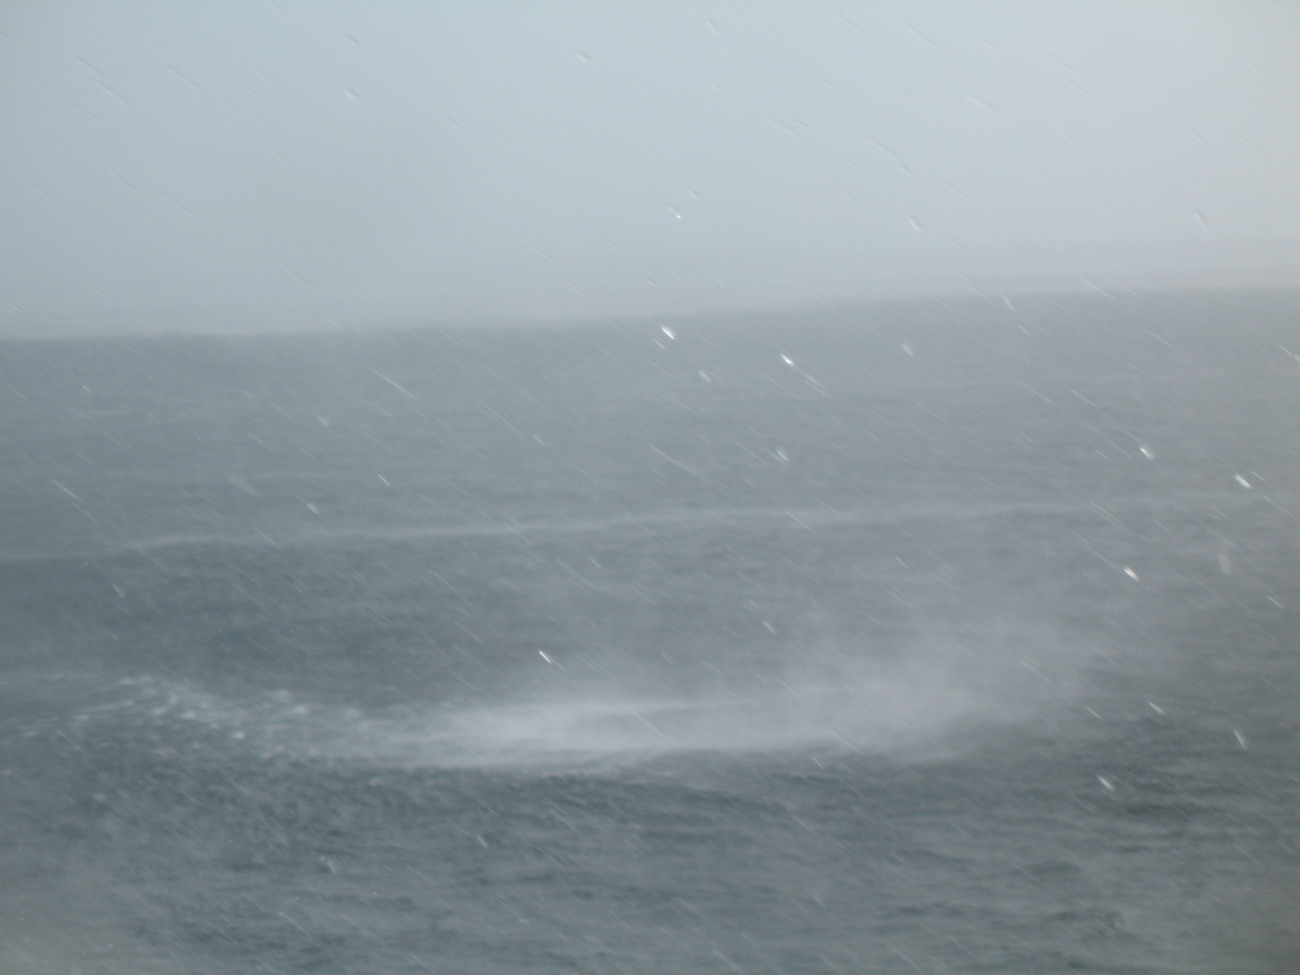 Waterspout sequence as the spray from a waterspout approaches the NOAA ShipGORDON GUNTER which is constrained in its ability tomaneuver as the recently launched TAO buoy is not yet anchored and is stillsecured by its mooring line to the ship